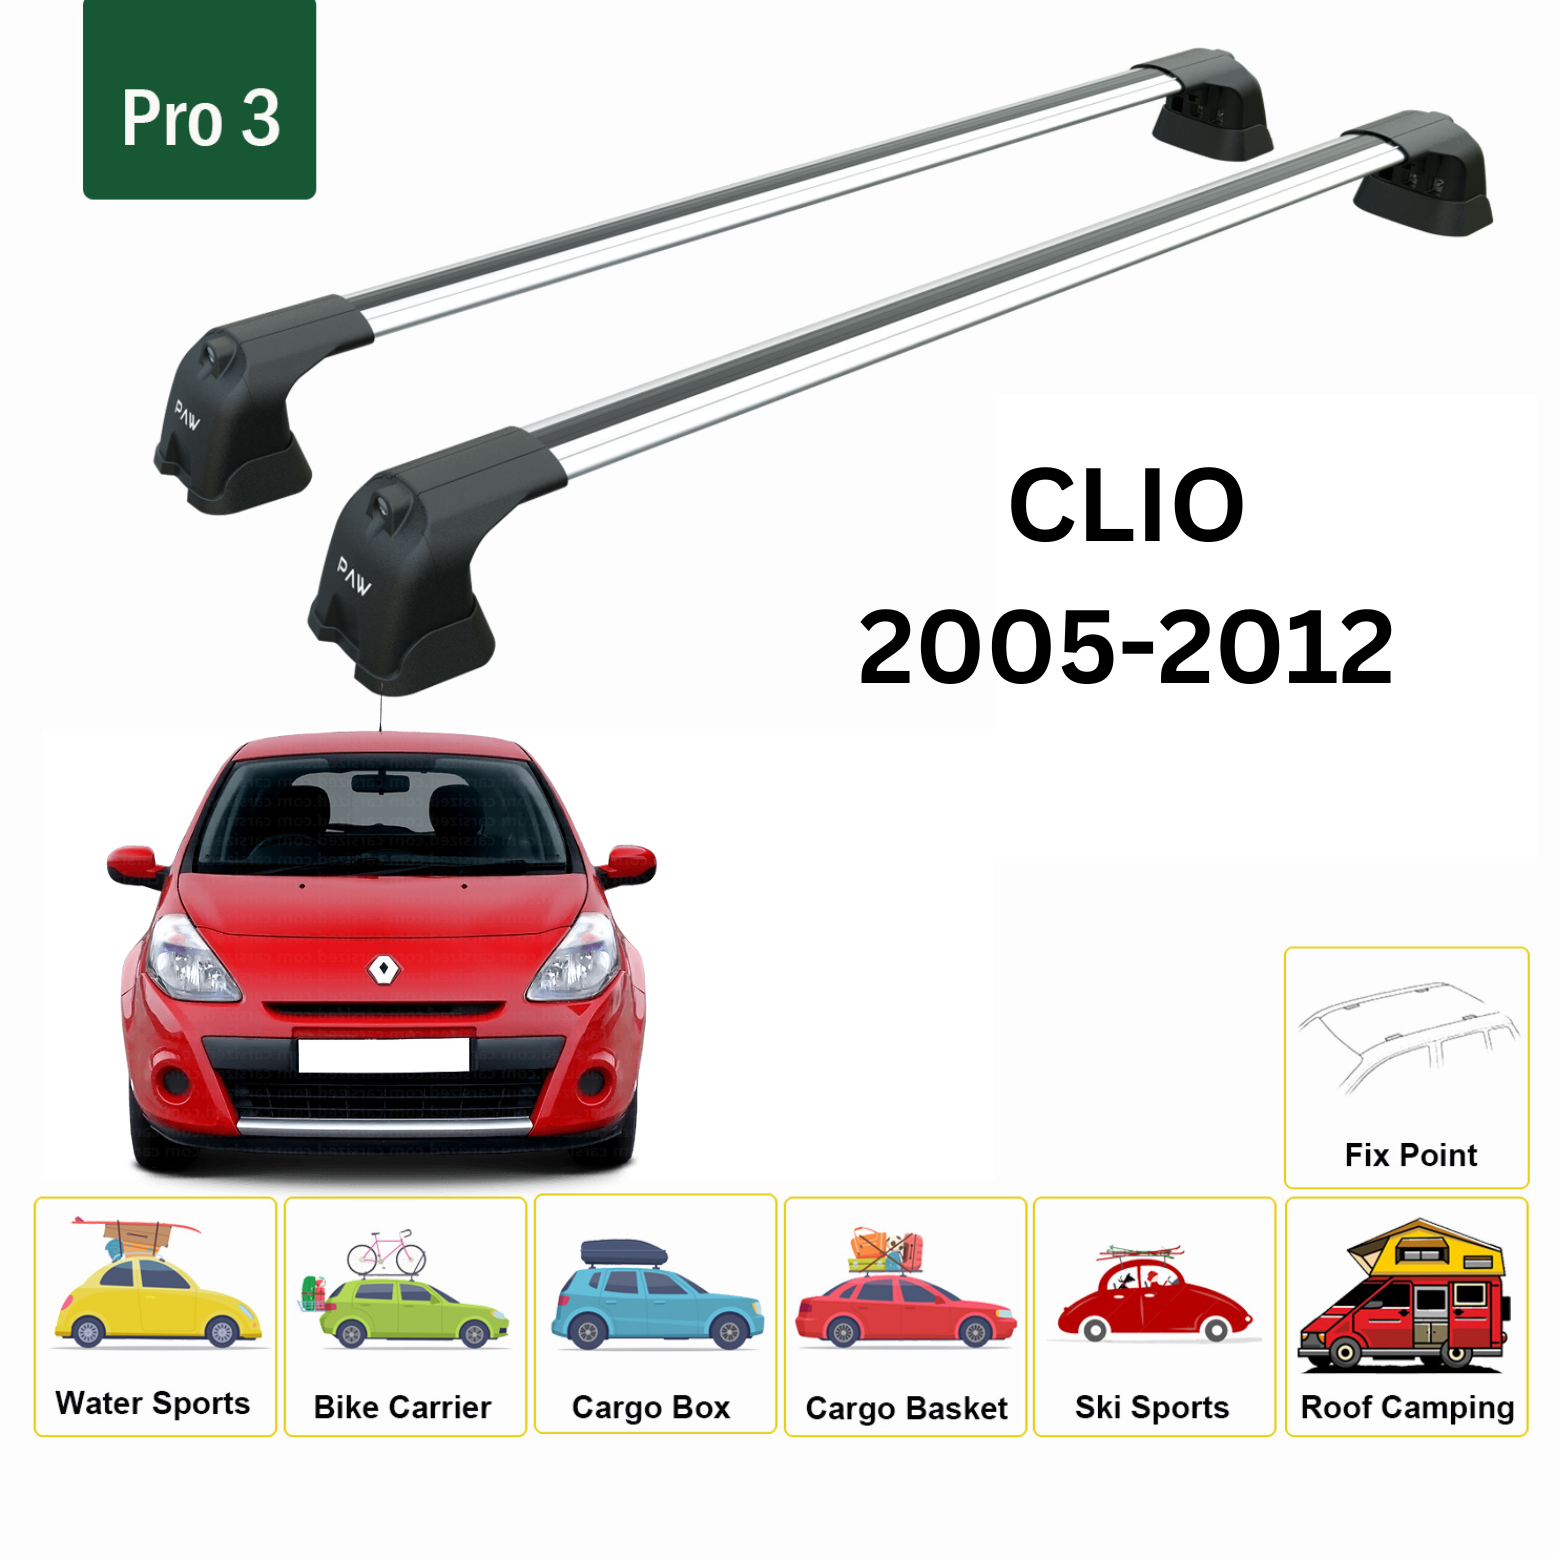 For Renault Clio 2005-2012 Roof Rack System, Aluminium Cross Bar, Metal Bracket, Fix Point, Silver